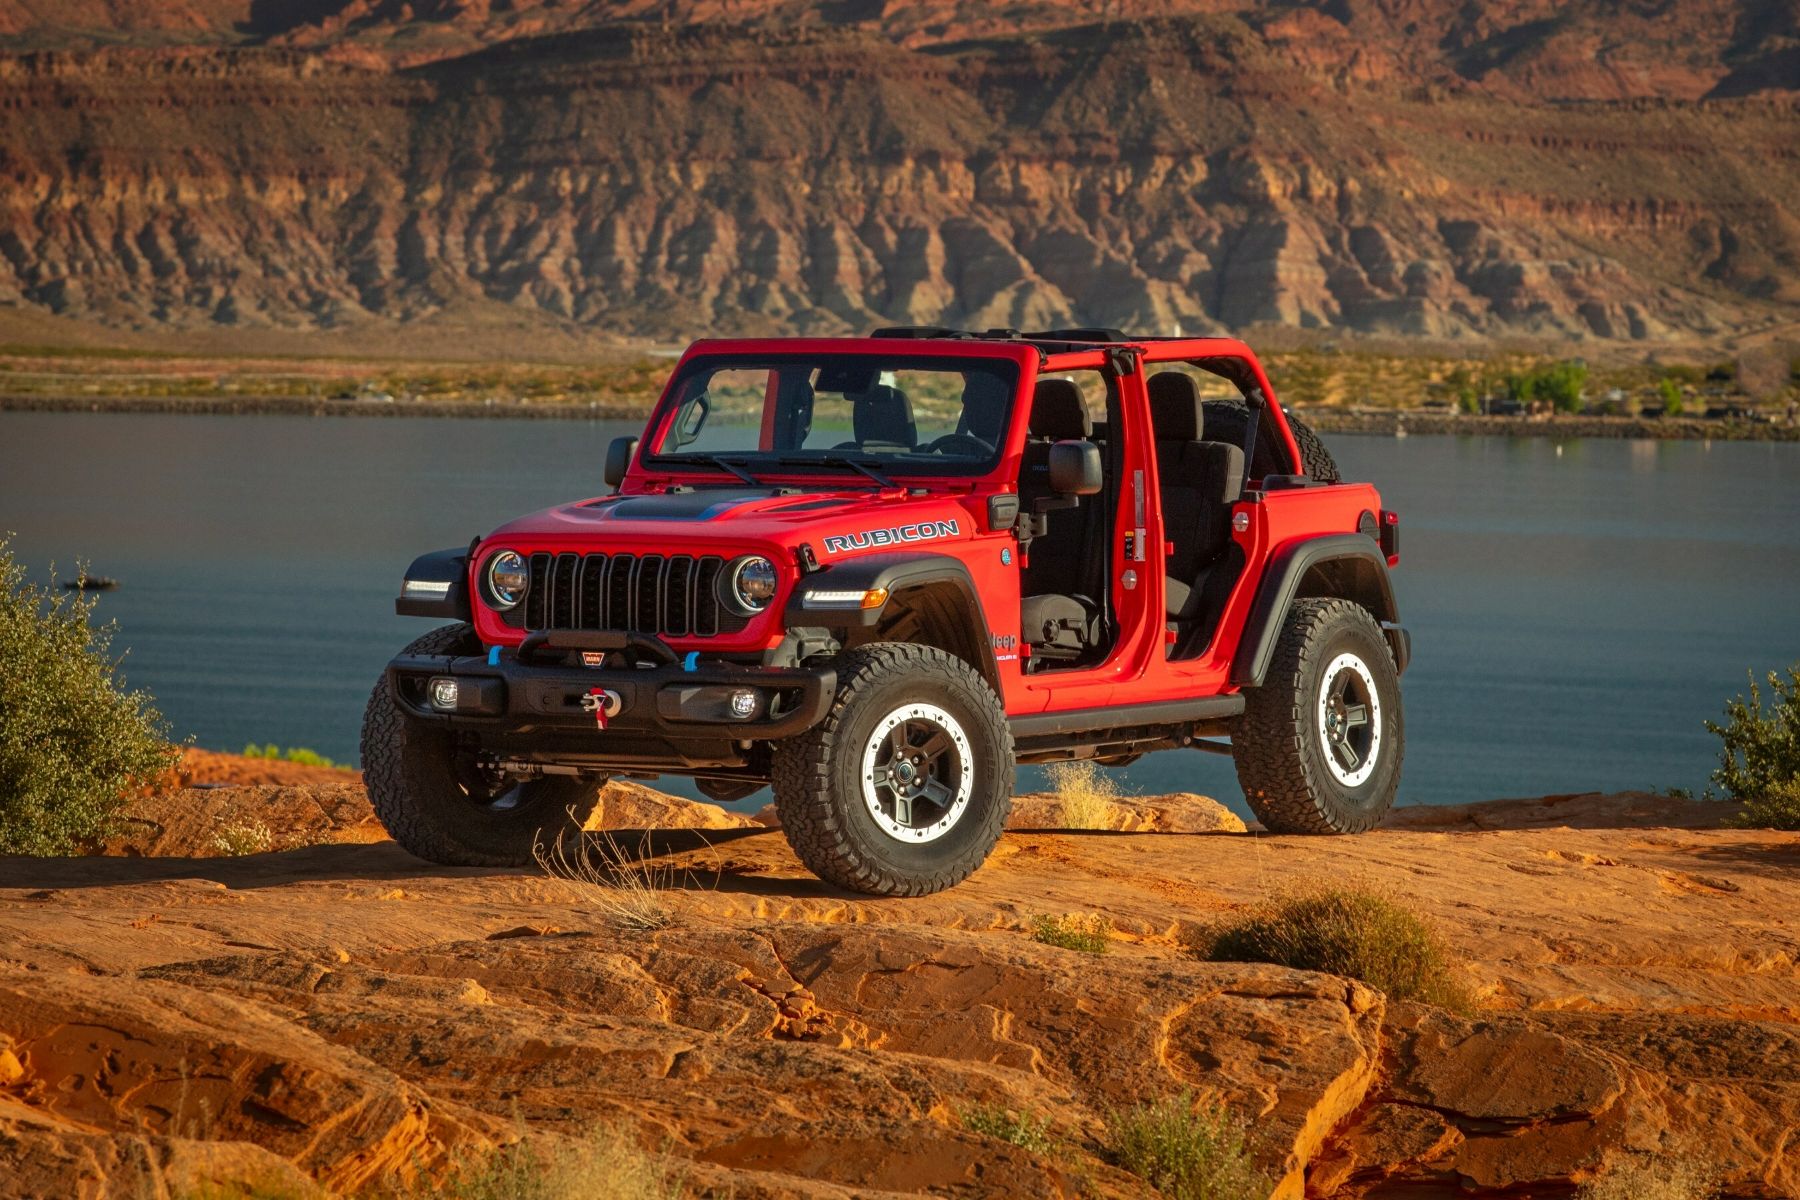 Jeep® Performance Parts Announces New Upgraded 2-inch Lift Kit Featuring Bilstein Shocks